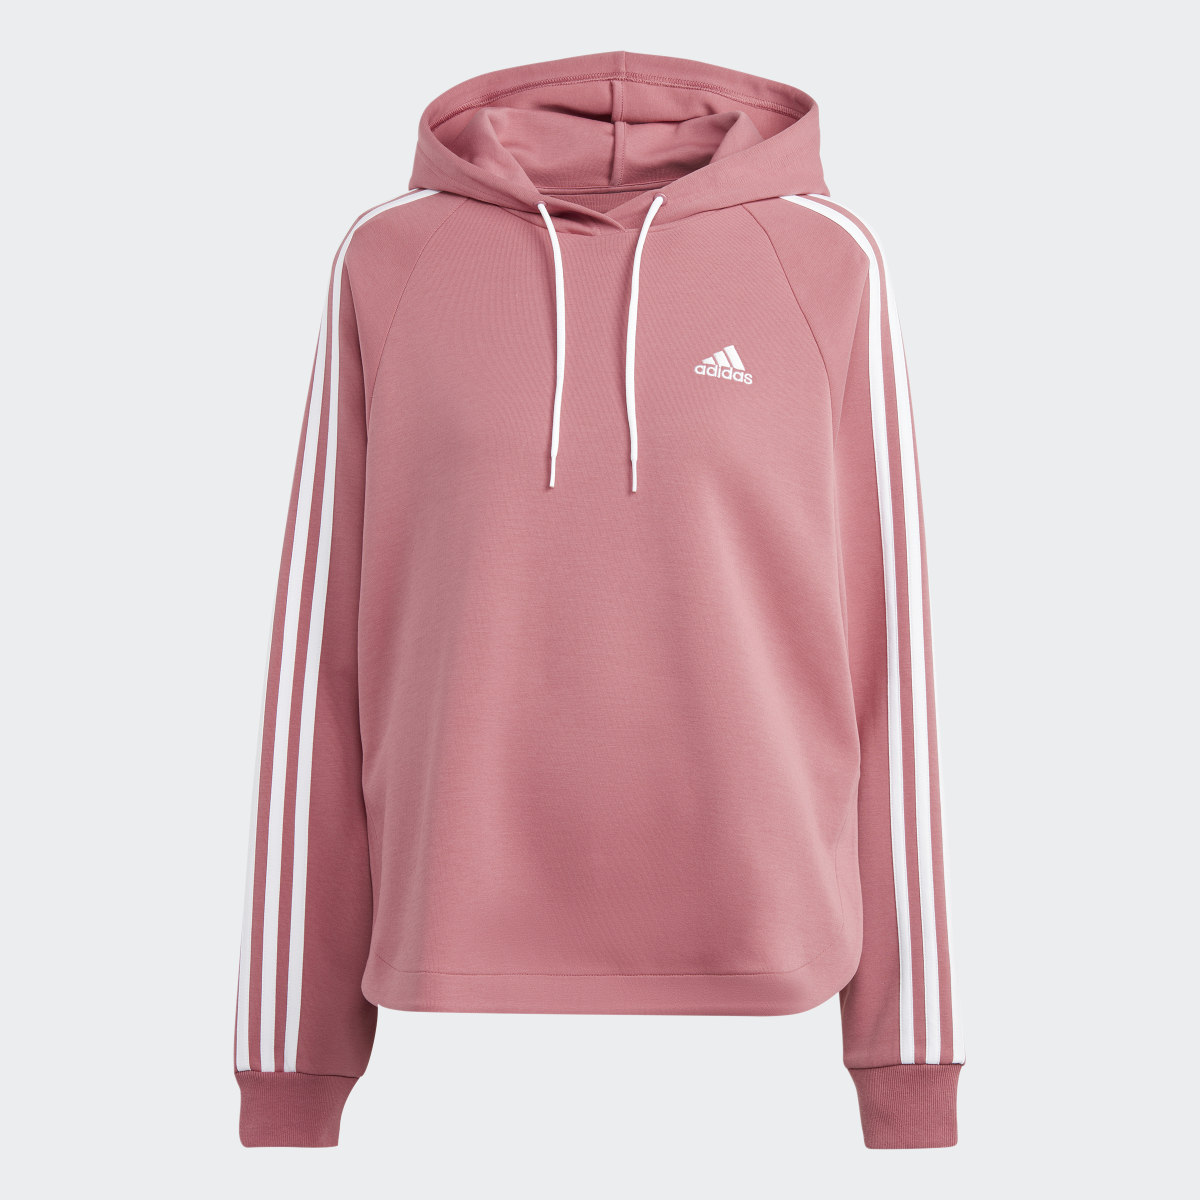 Adidas Maternity Over-the-Head Hoodie. 5